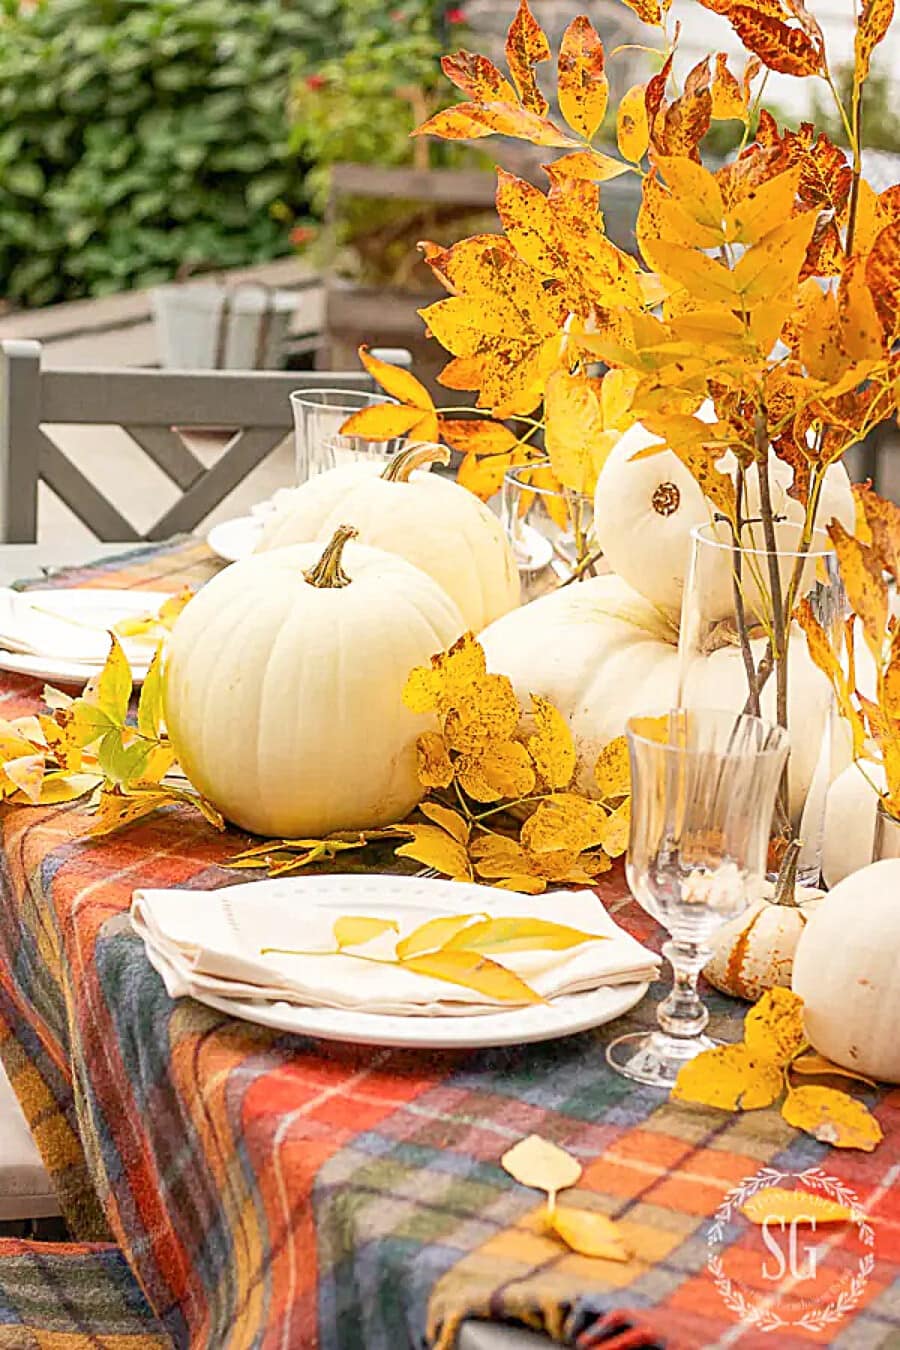 Easy Savvy And Fun Thanksgiving Ideas- The Ultimate Guide